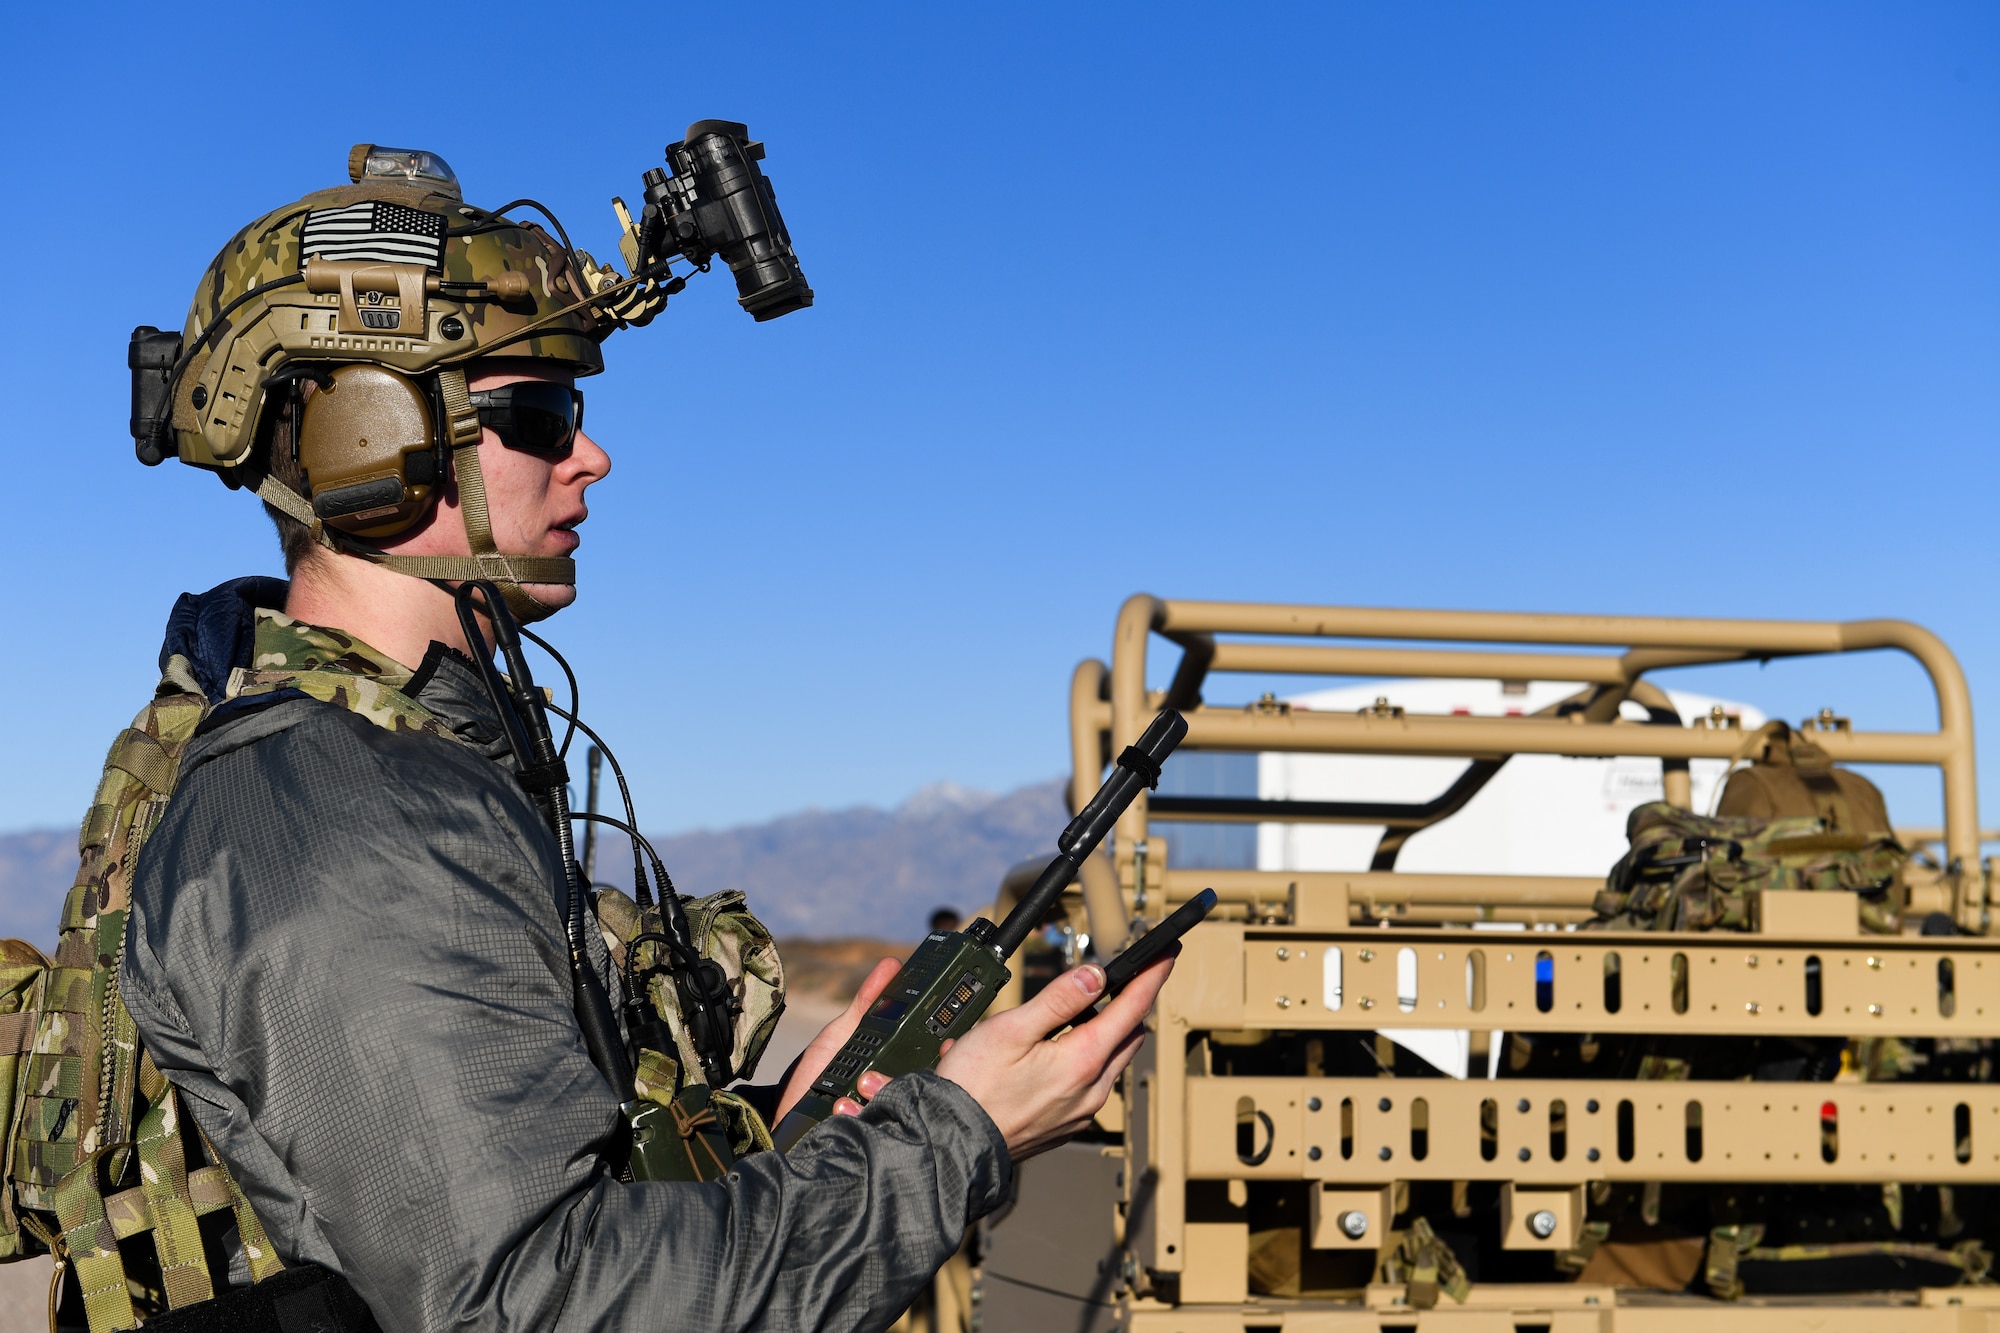 U.S. Air Force 2nd Lt. William, 351st Special Warfare Training Squadron combat rescue officer student, trains with tactical air control party members, assigned to the 7th Air Support Operations Squadron, on calling in close air support and nine lines on Red Rio Range, N.M., March 14, 2019. The CROs and TACPs worked with MQ-9 Reapers from Holloman Air Force Base, N.M., to simulate real world scenarios and improve communication with the pilots. Last names have been withheld due to operational security restraints.(U.S. Air Force photo by Senior Airman Haley D. Phillips)